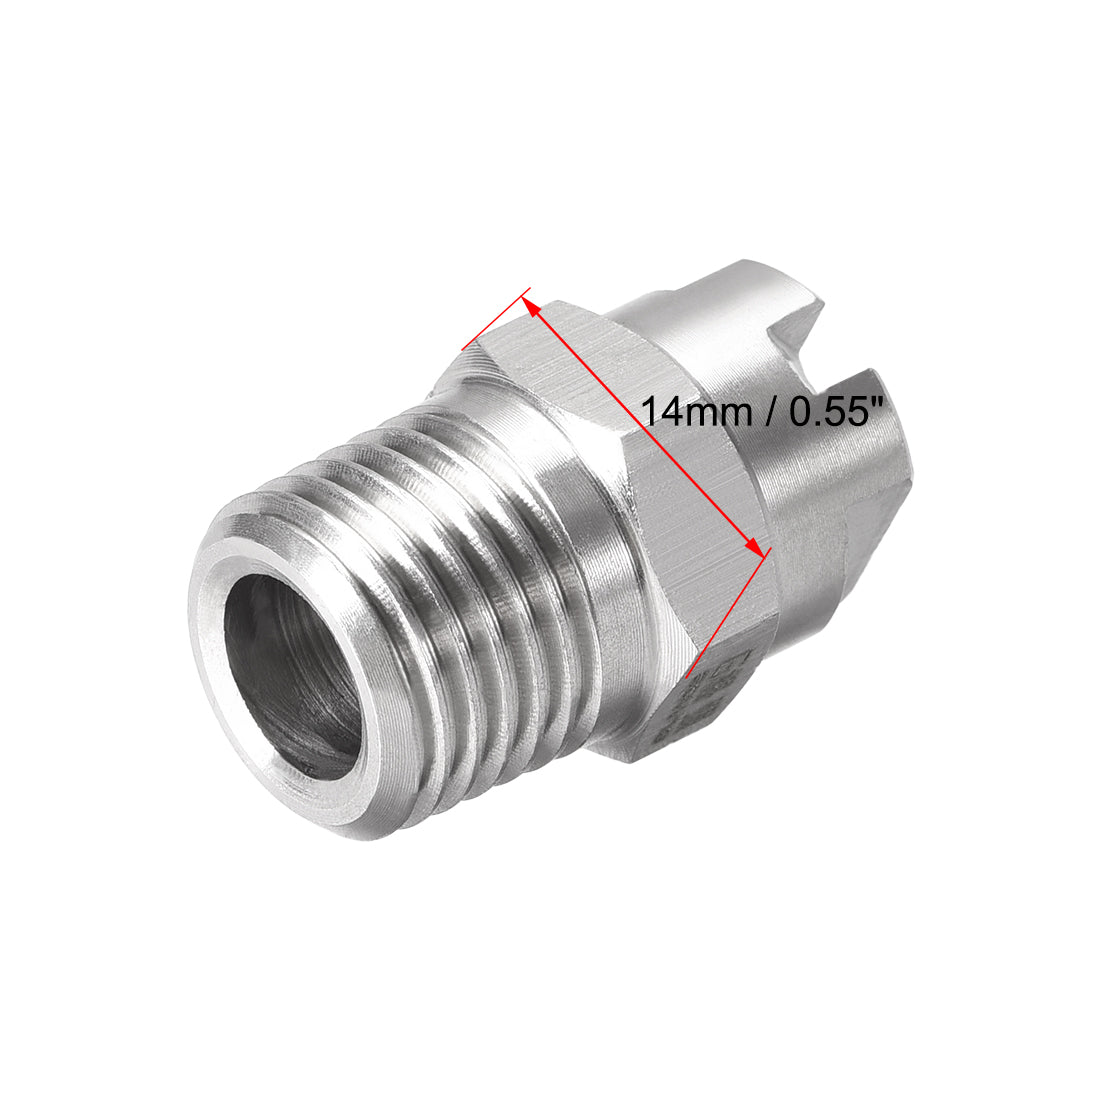 uxcell Uxcell Flat Fan Spray Tip - 1/4BSPT Male Thread 304 Stainless Steel Nozzle - 65 Degree 2mm Orifice Diameter - 2 Pcs